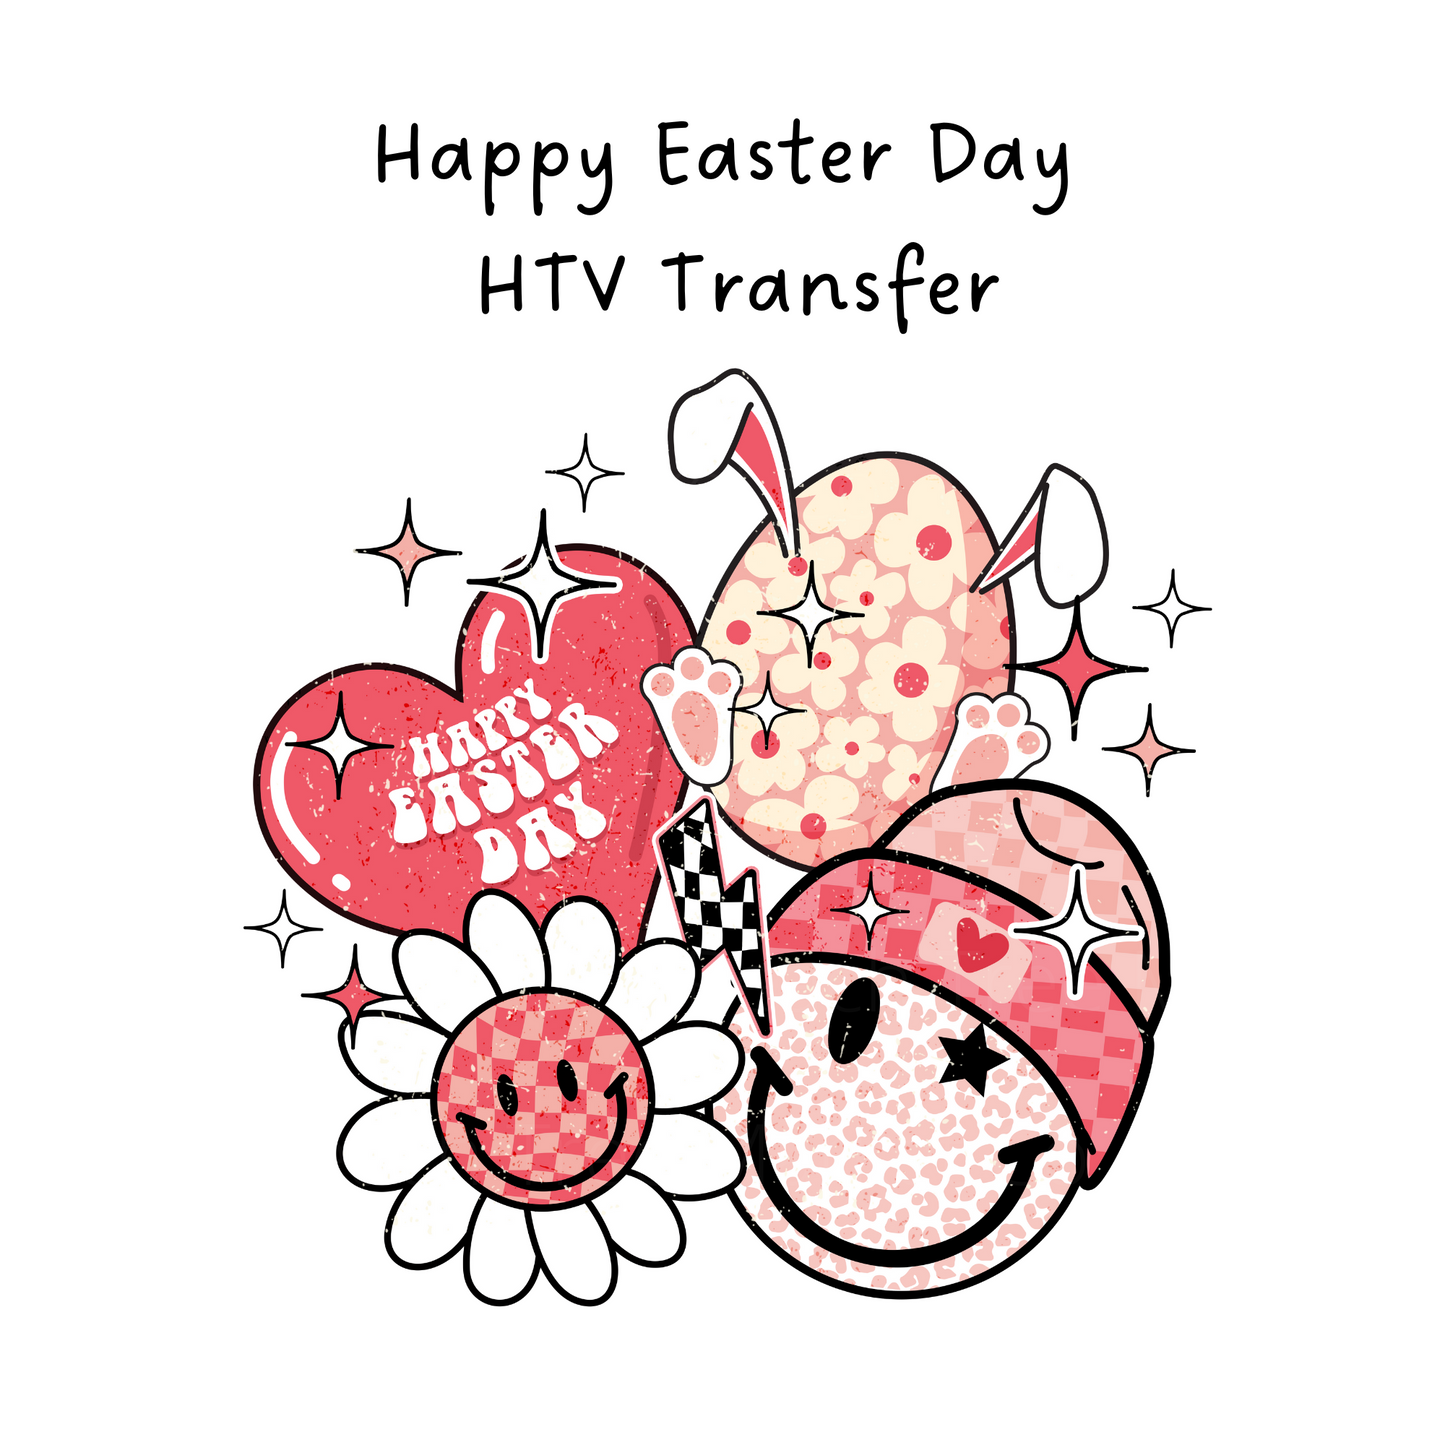 Happy Easter Day HTV Transfer